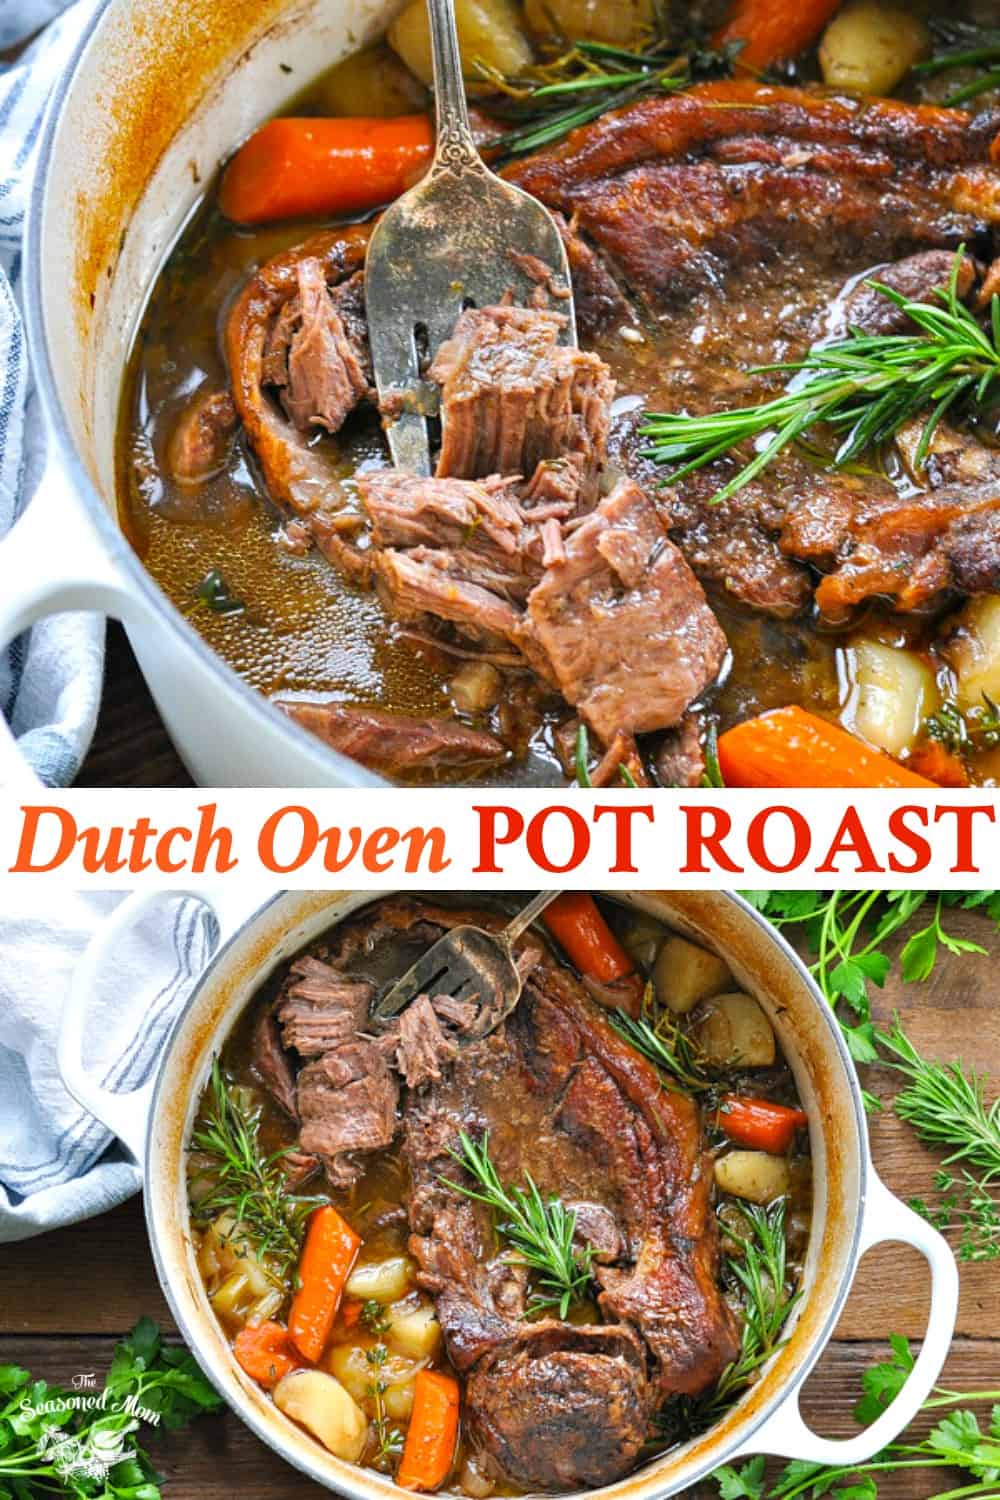 Long collage image of Dutch Oven Pot Roast